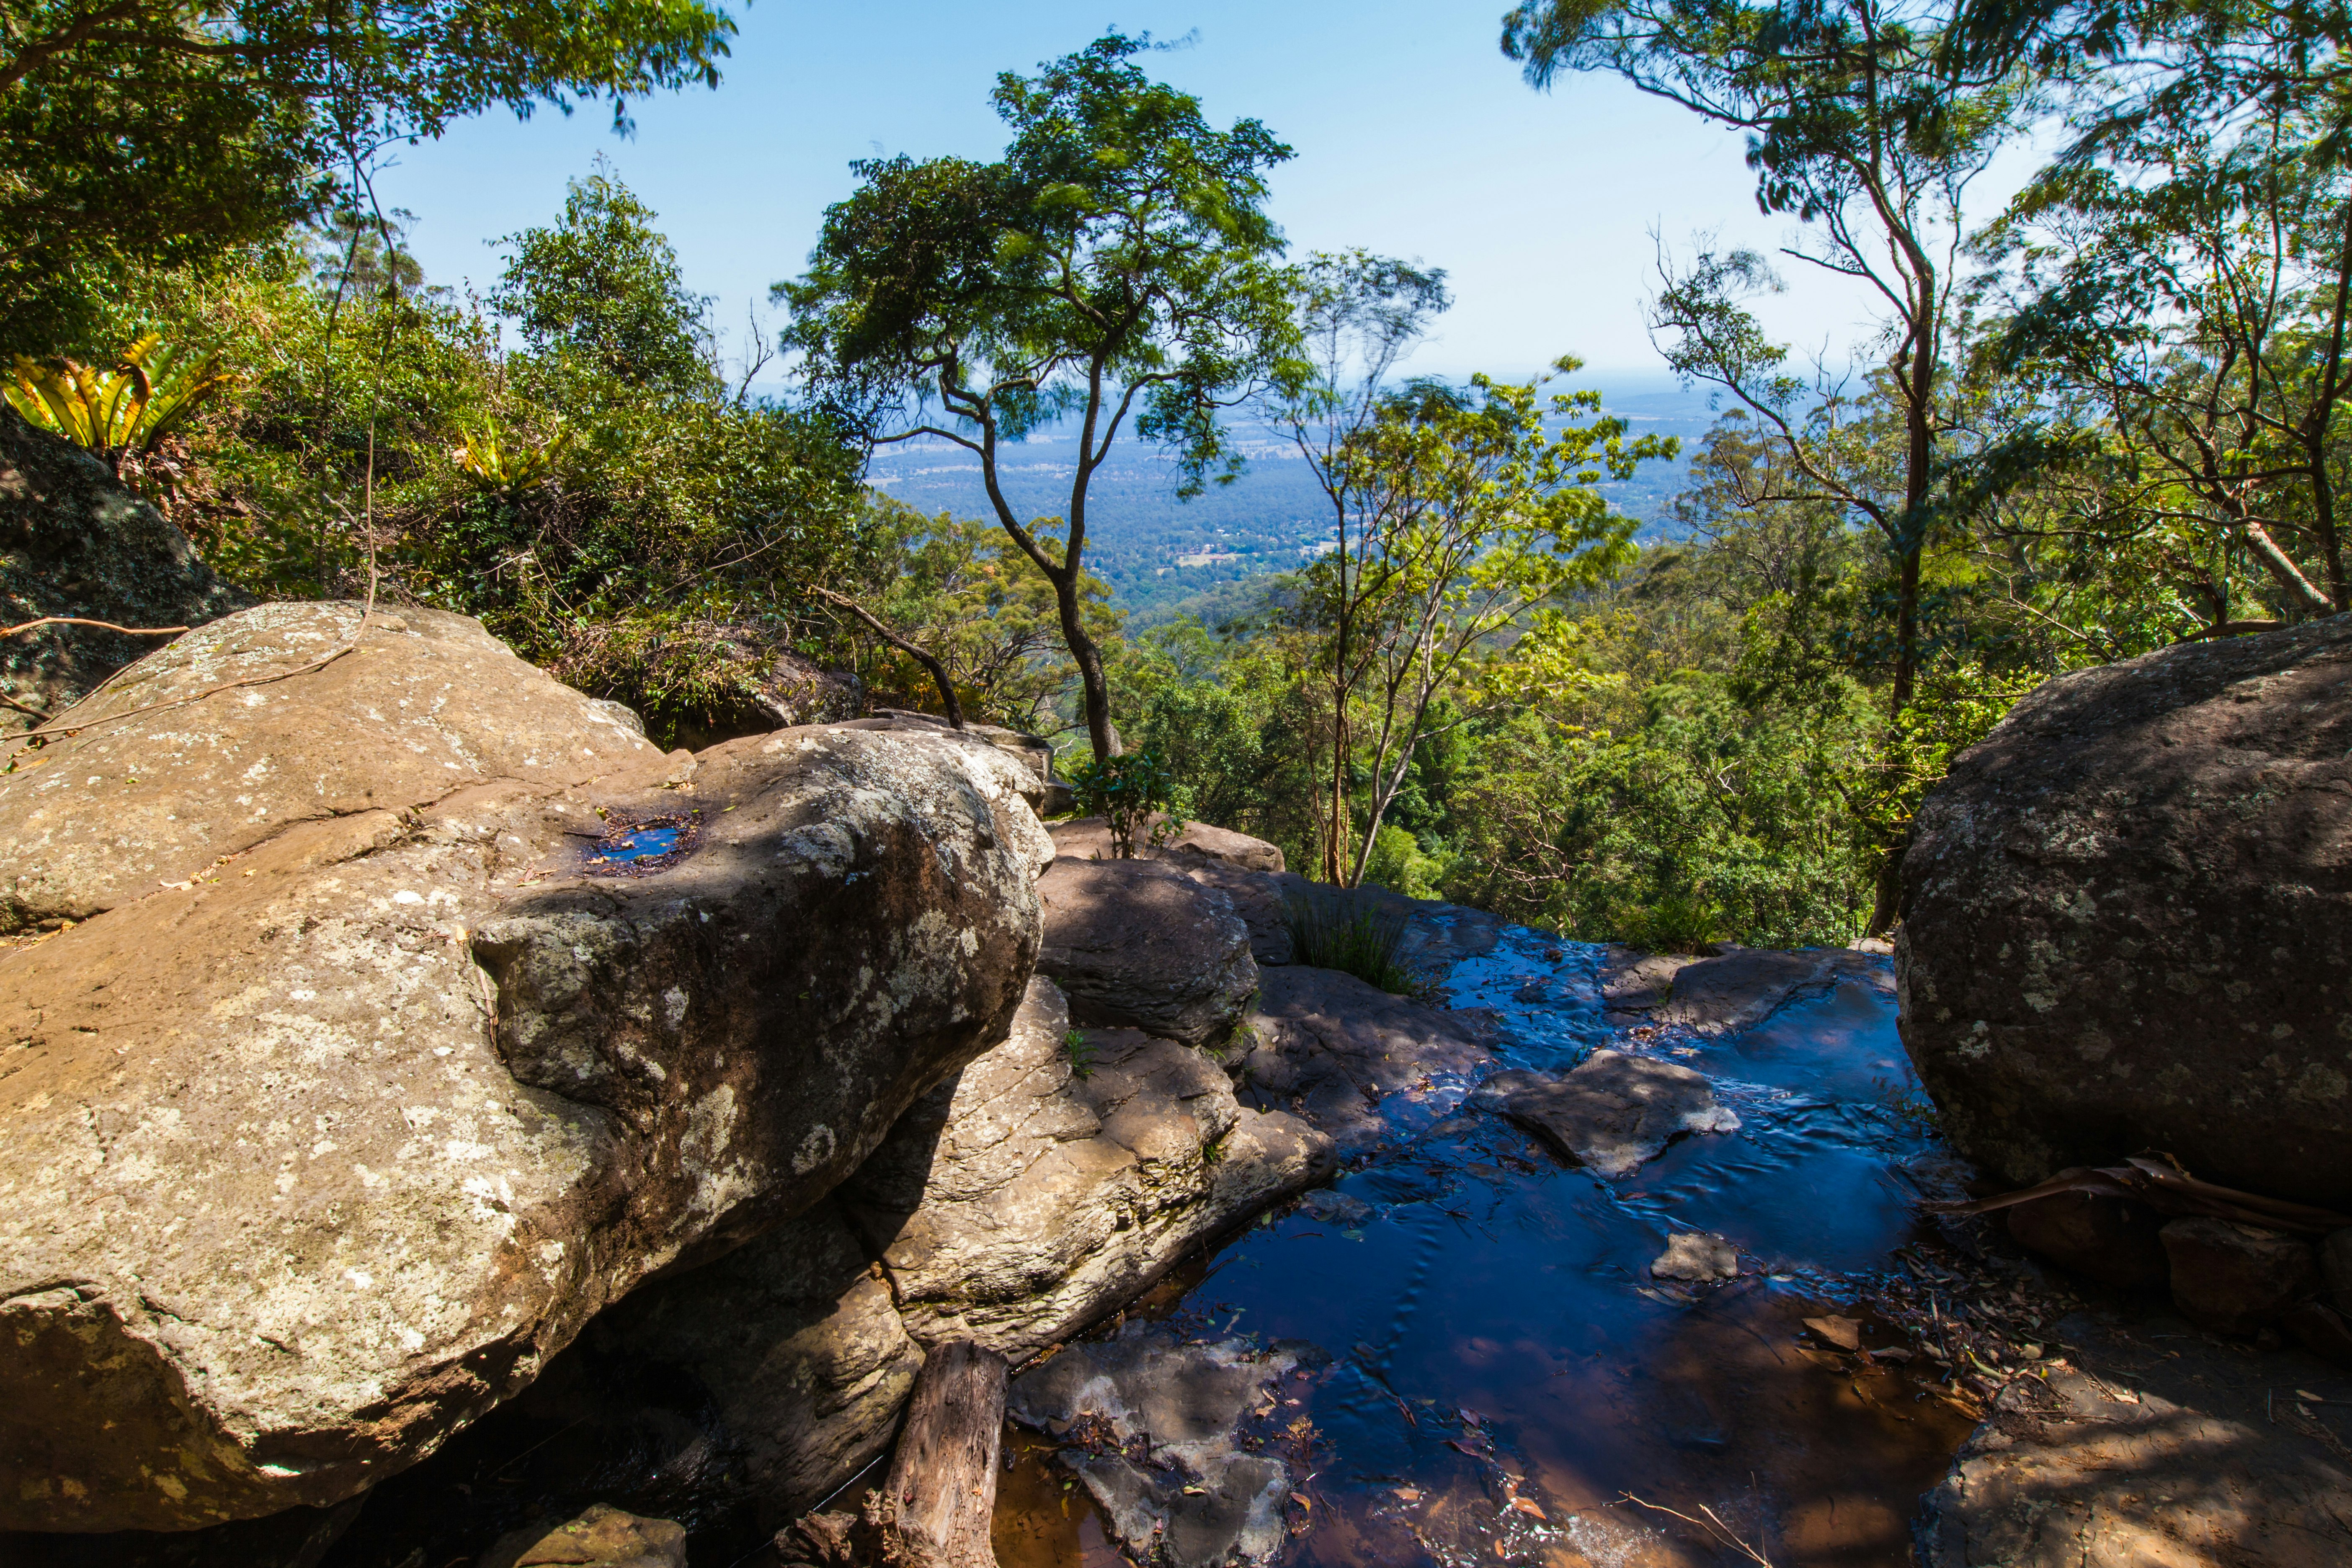 A shallow pool surrounded by large rocks on Tamborine Mountain, looking out over an expanse of rainforest.